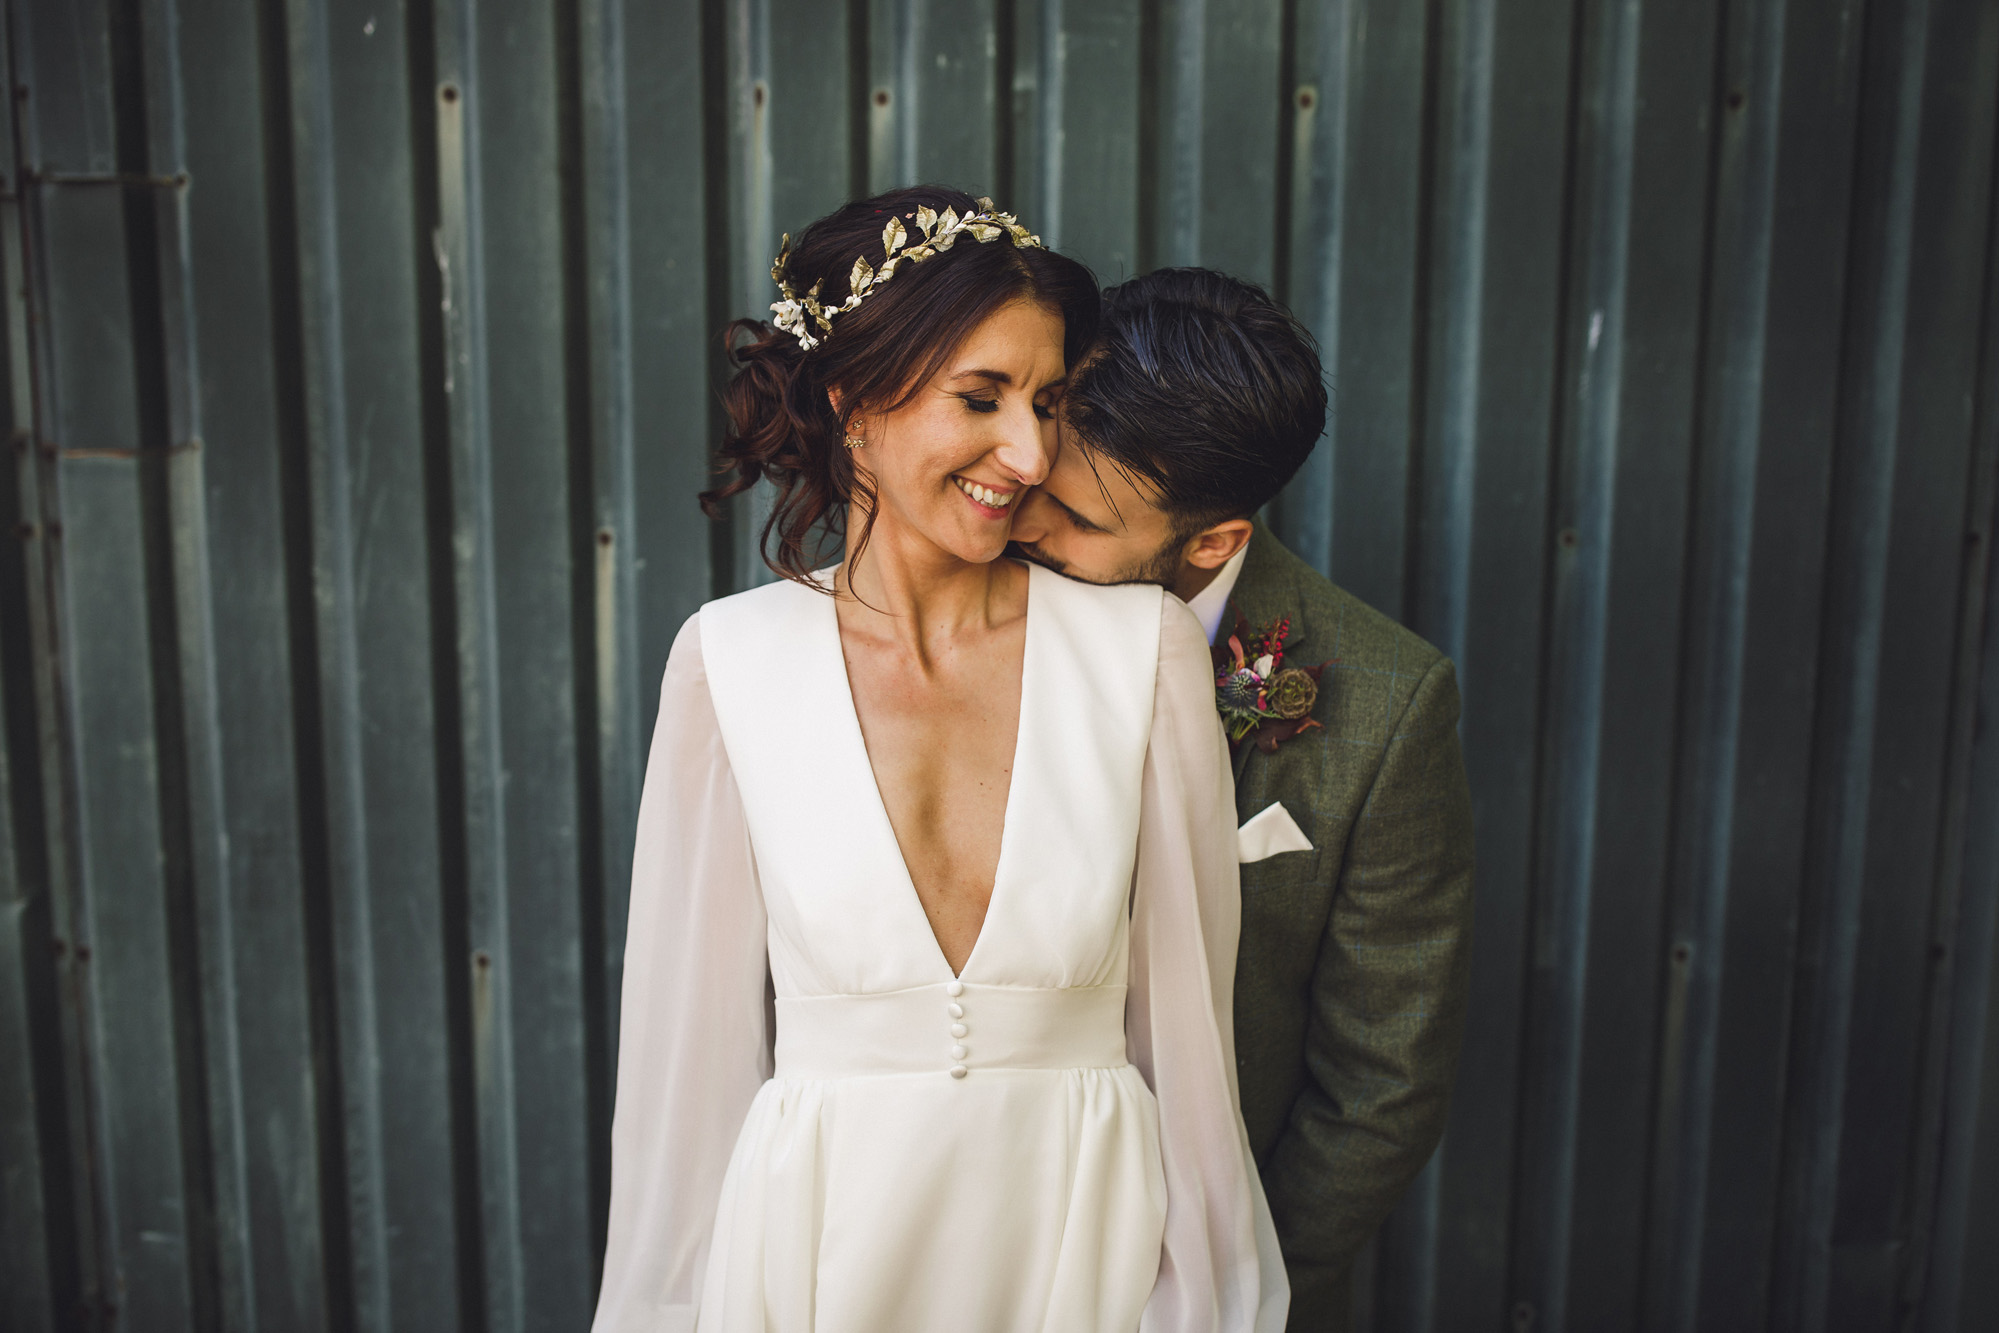 44 A 70s boho bride and her music inspired farm wedding